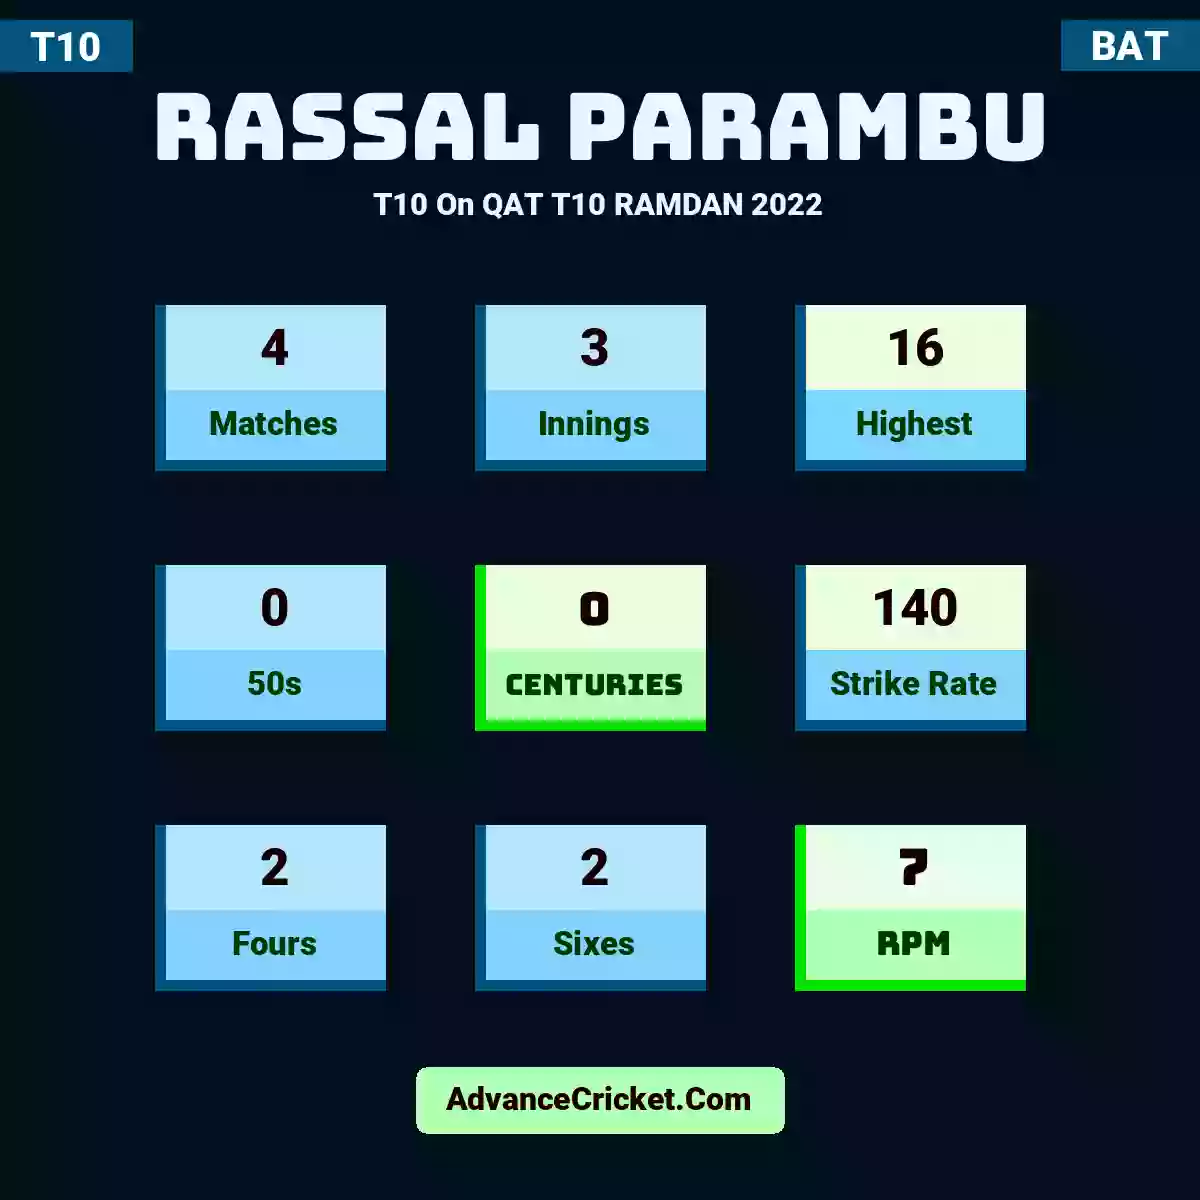 Rassal Parambu T10  On QAT T10 RAMDAN 2022, Rassal Parambu played 4 matches, scored 16 runs as highest, 0 half-centuries, and 0 centuries, with a strike rate of 140. R.Parambu hit 2 fours and 2 sixes, with an RPM of 7.